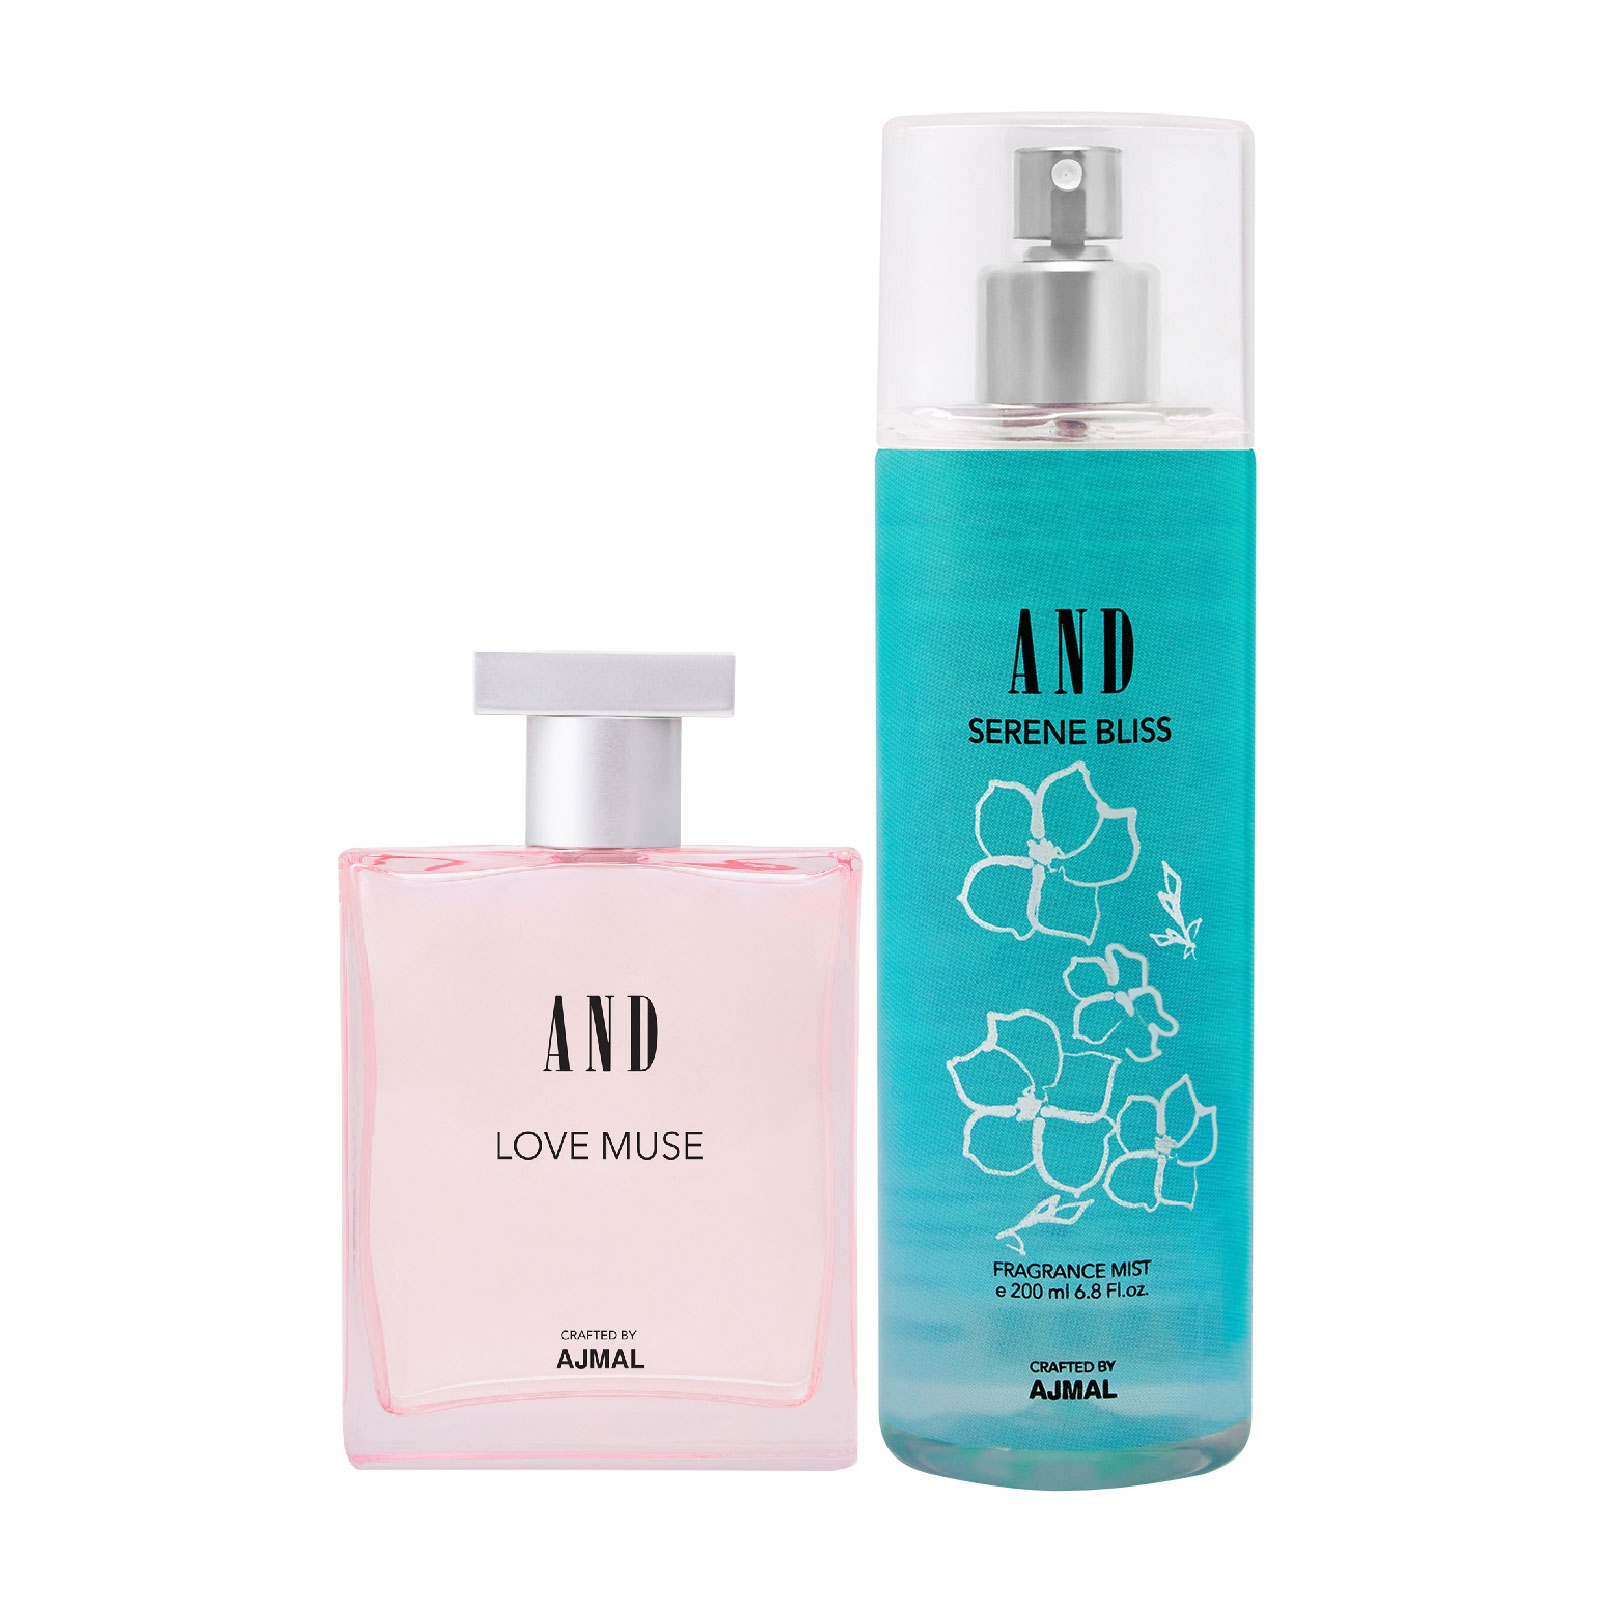 AND Crafted By Ajmal | AND Love Muse Eau De Parfum 50ML & Serene Bliss Body Mist 200ML Pack of 2 for Women Crafted by Ajmal + 2 Parfum Testers